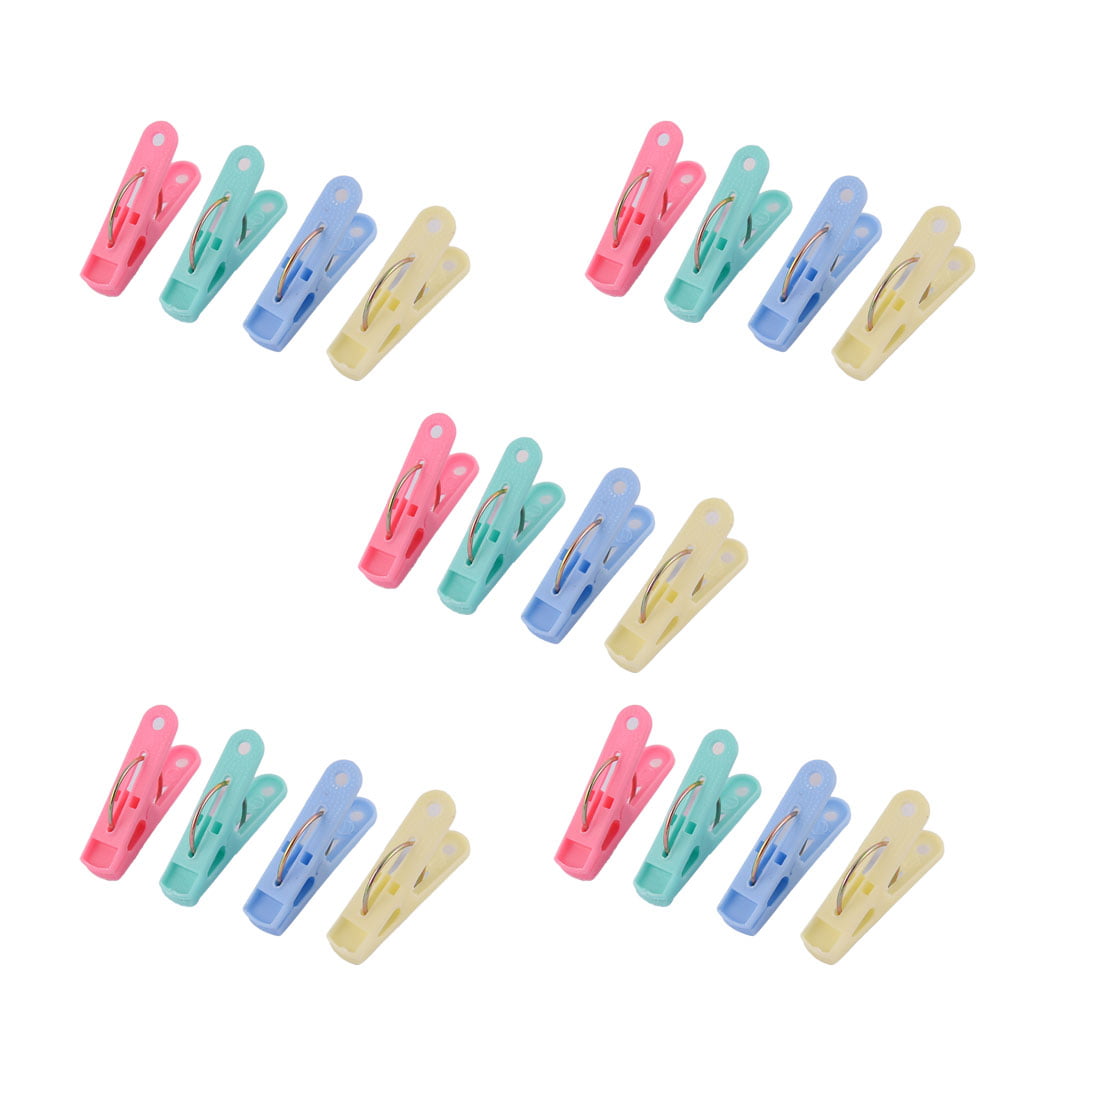 20 pcs Plastic Clothes Pegs Clips Laundry Clips Clothespin 